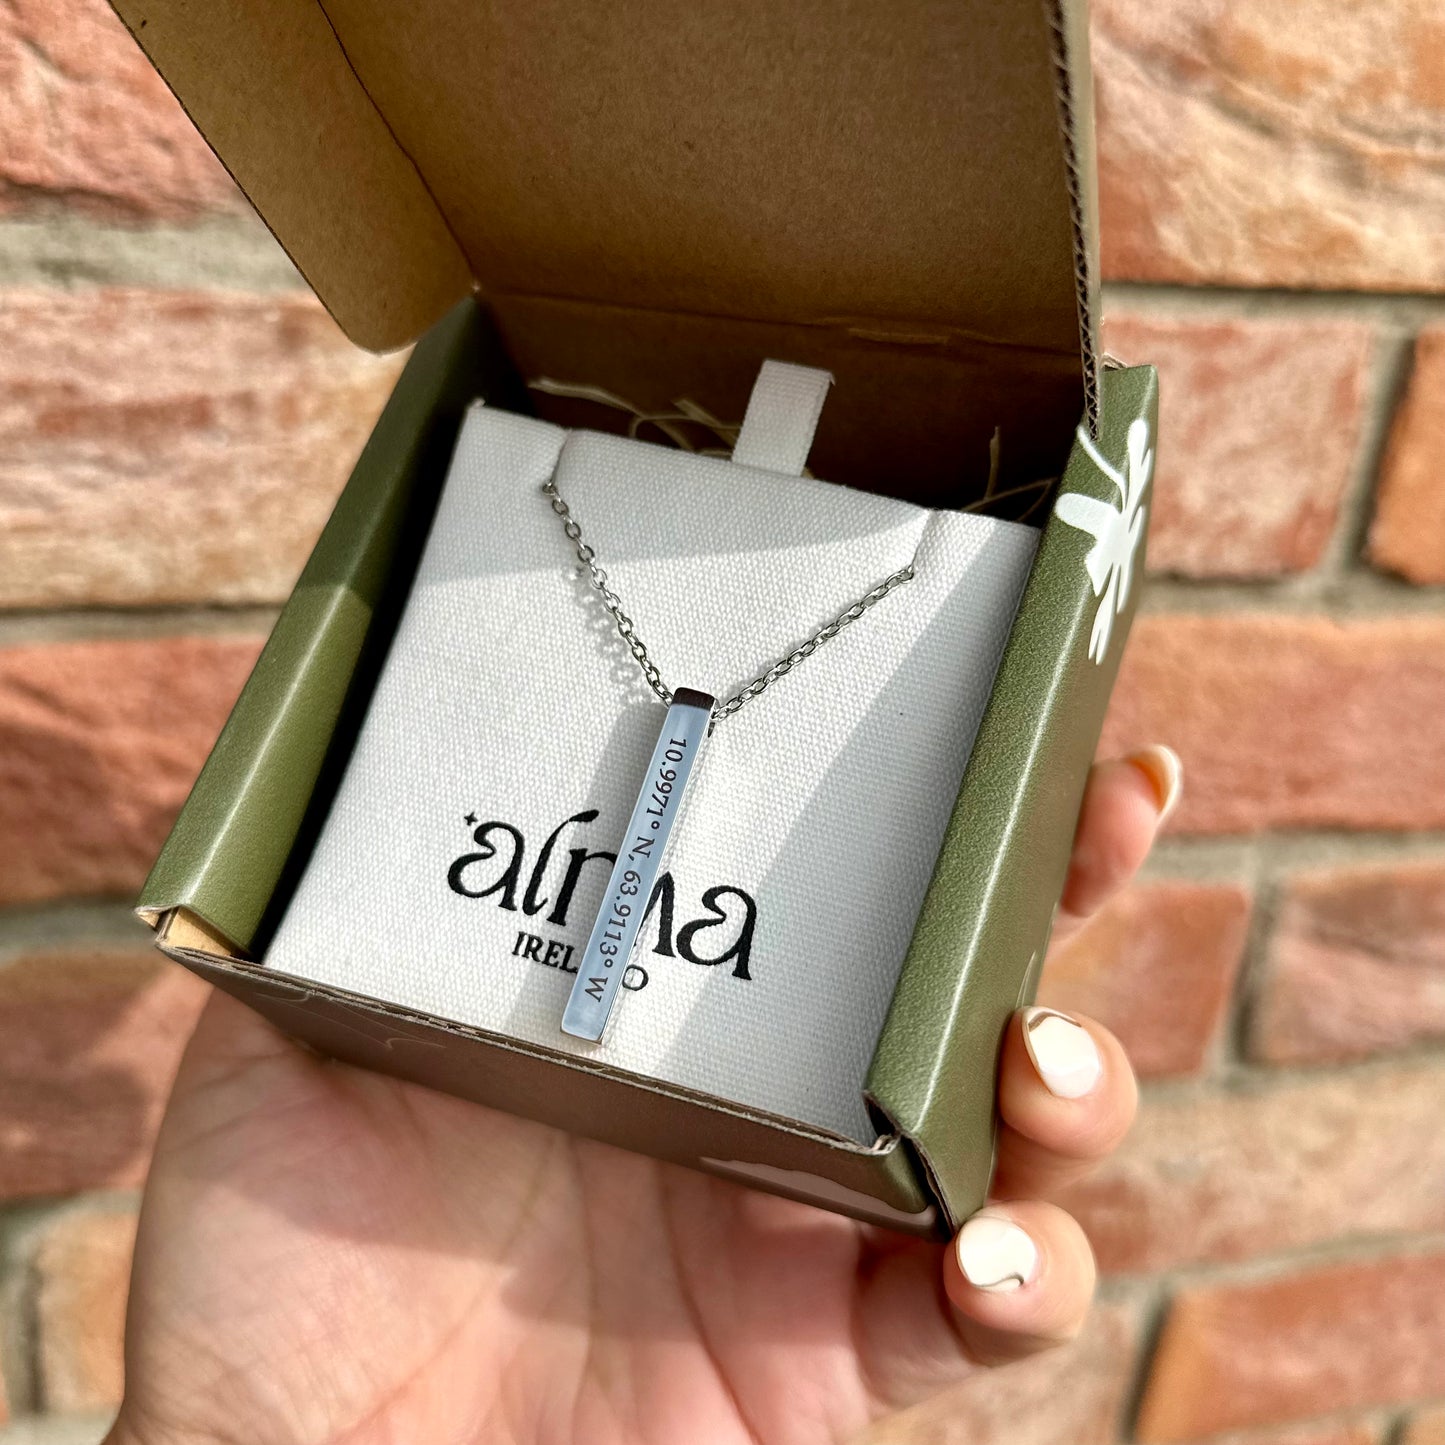 Get trendy with Dublin Necklace - Vertical Engraved Bar - Vertical bar available at Alma Ireland. Grab yours for €29.99 today!